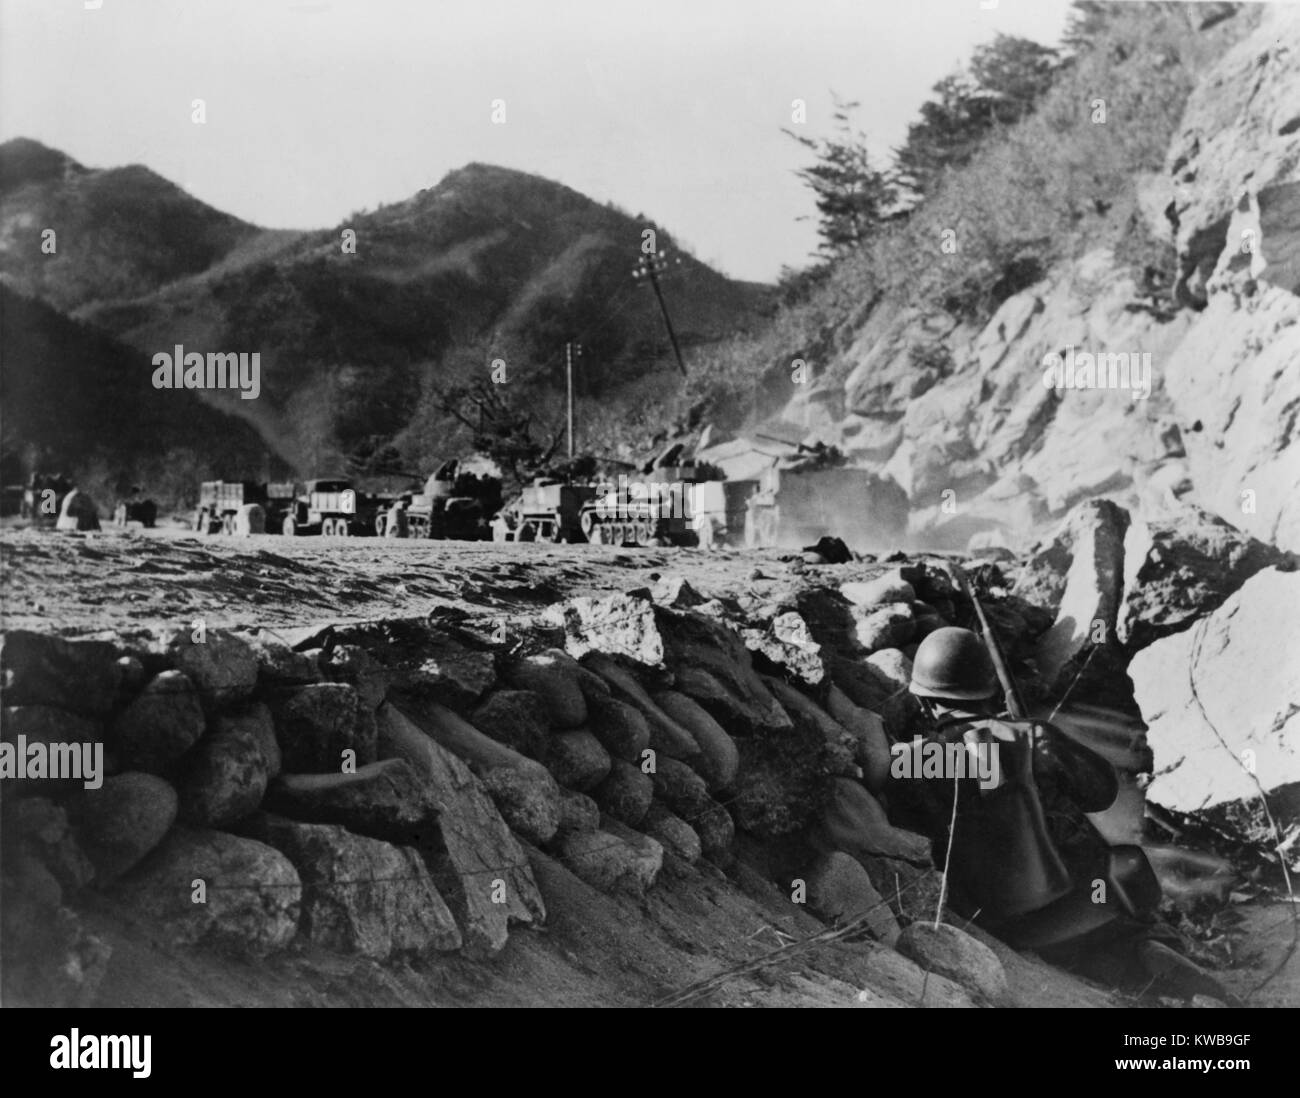 U.S. 3rd Army Division patrol pinned down by Chinese fire from the hills as they protect a convoy under attack in north-east Korea 1950. Korean War, 1950-53. (BSLOC 2014 11 95) Stock Photo